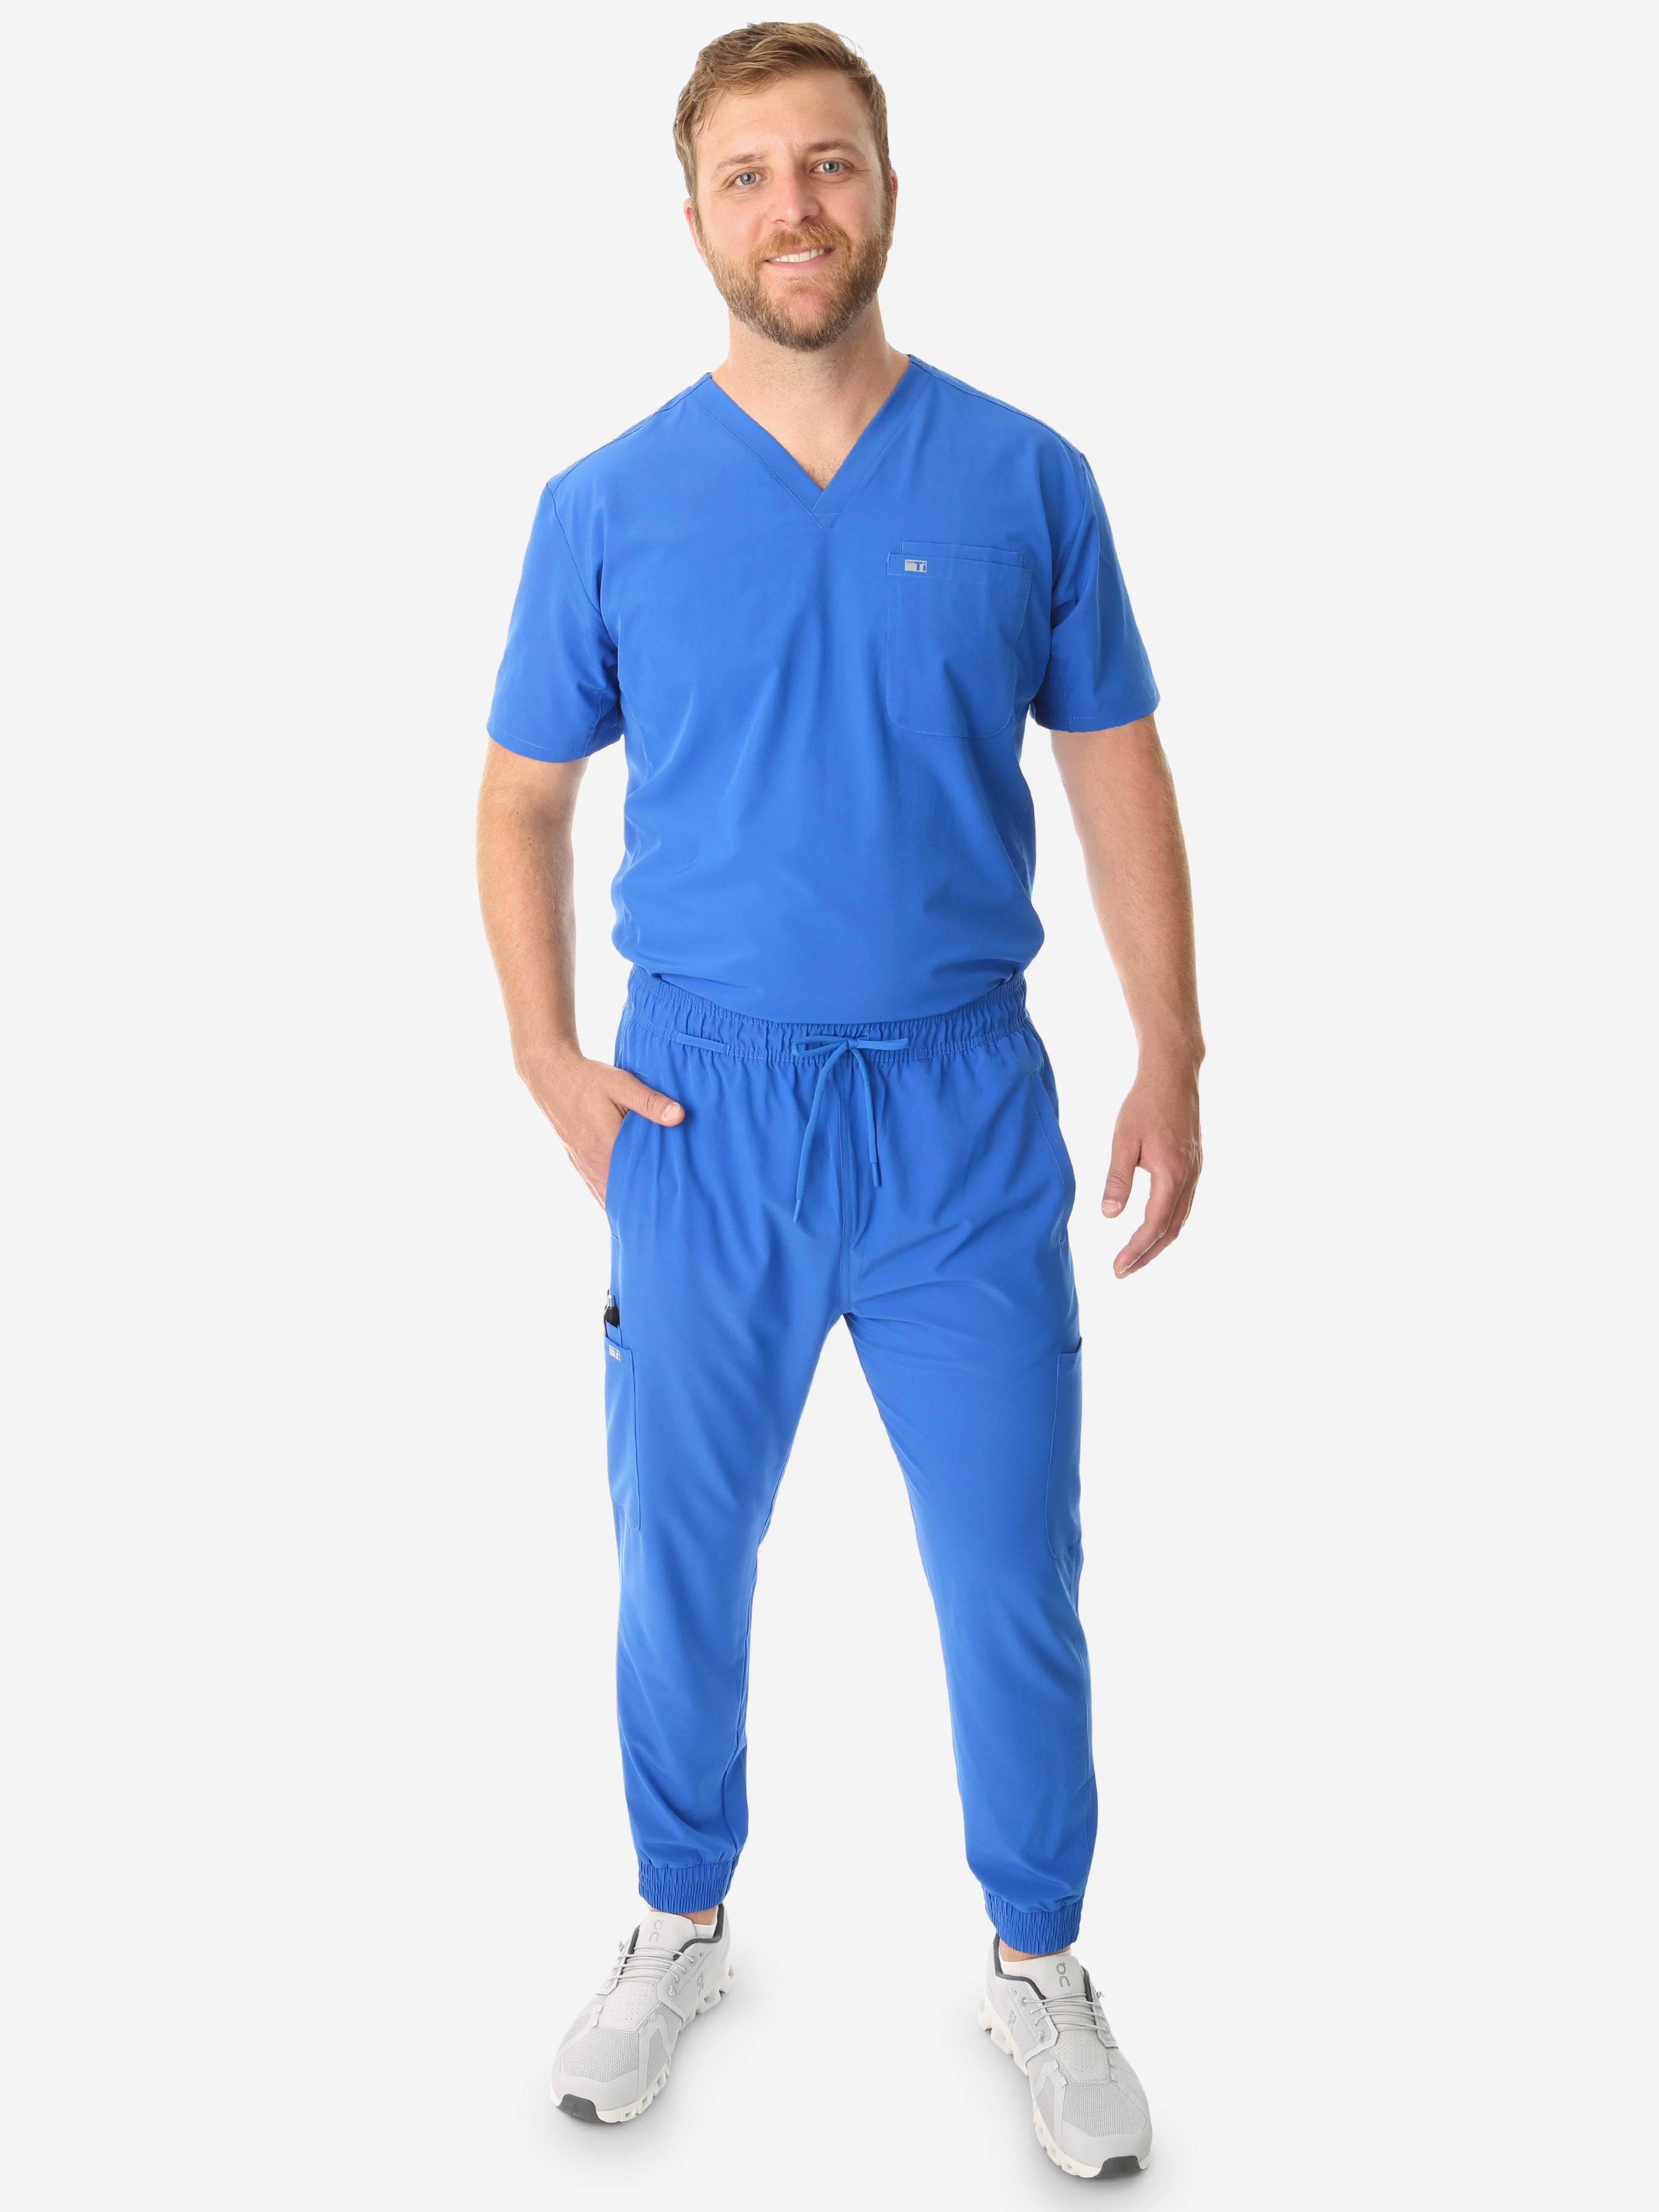 TiScrubs Men&#39;s Stretch Royal Blue Double-Pocket Scrub Top and Jogger Pants Full Body Front